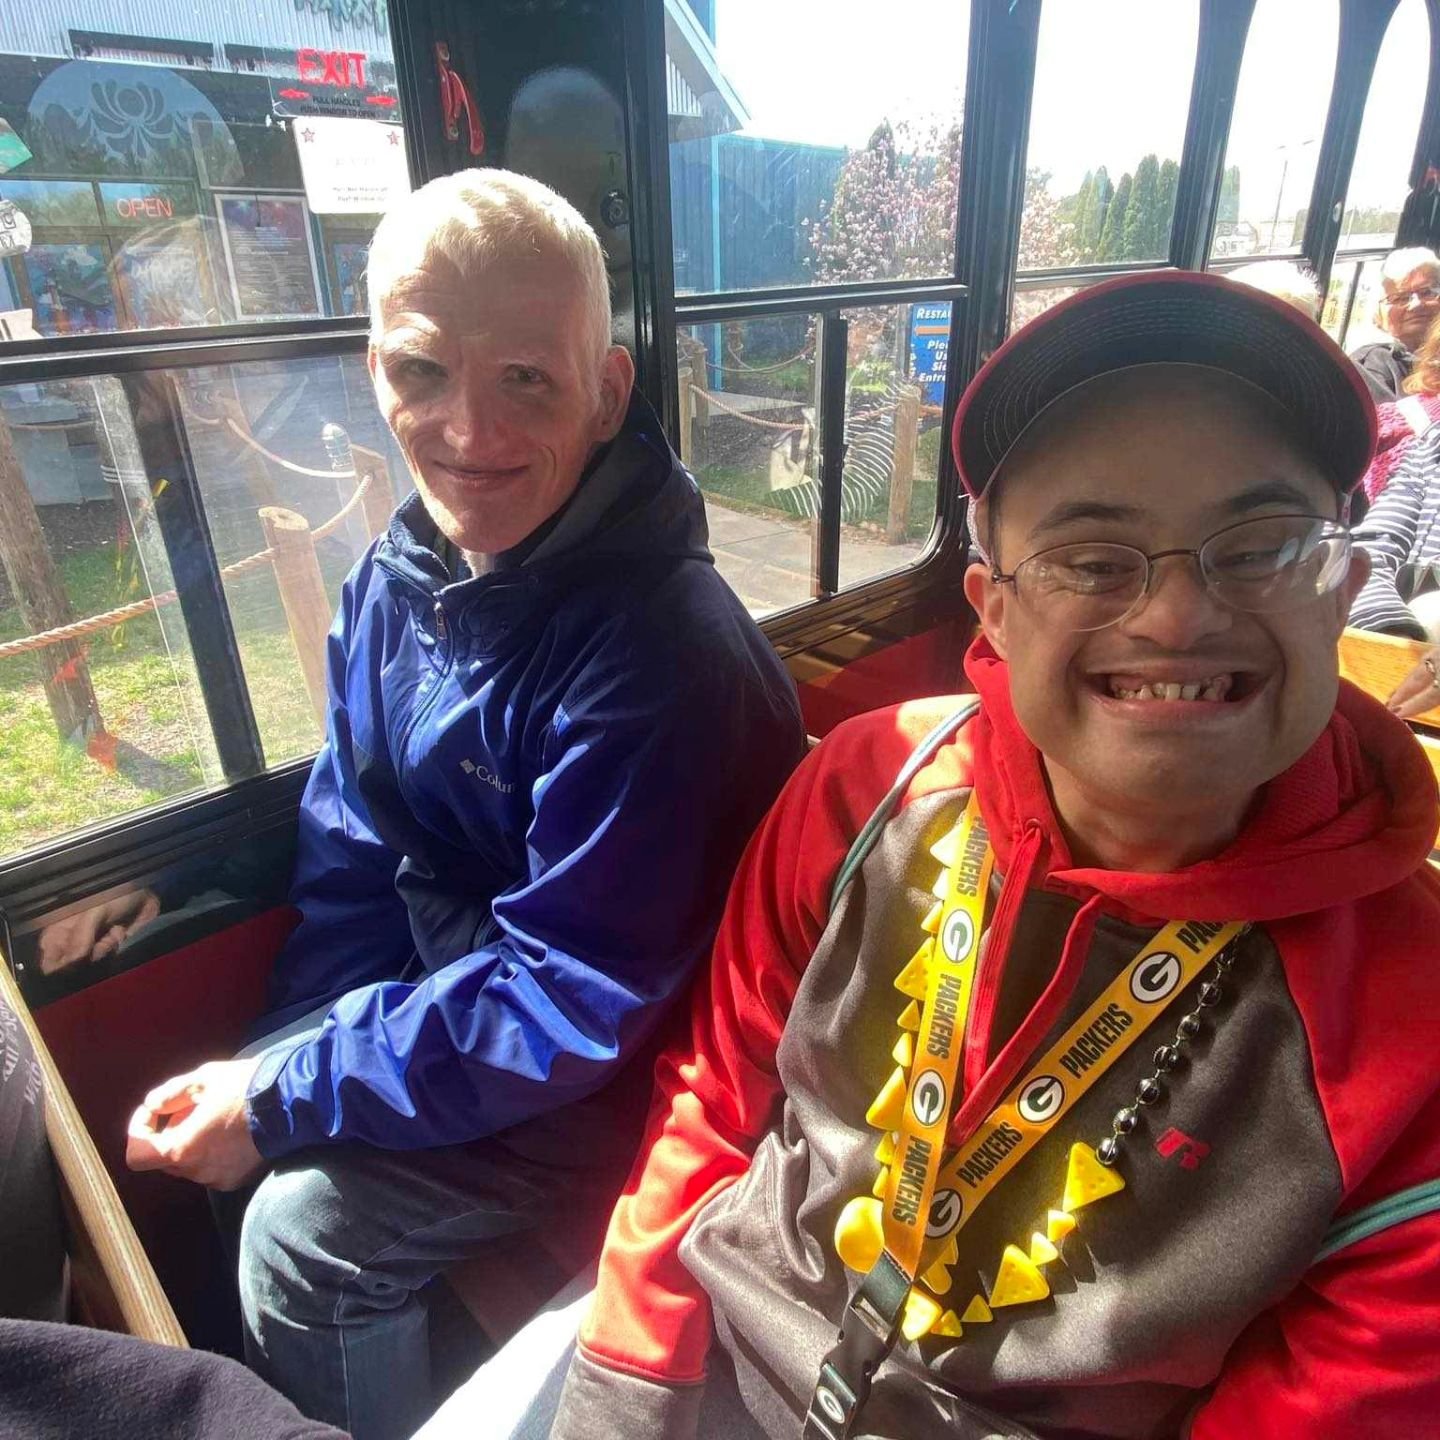 We took a day trip on the @wisdellstrolley! We had so much fun seeing the sights all around the Dells on the scenic tour!